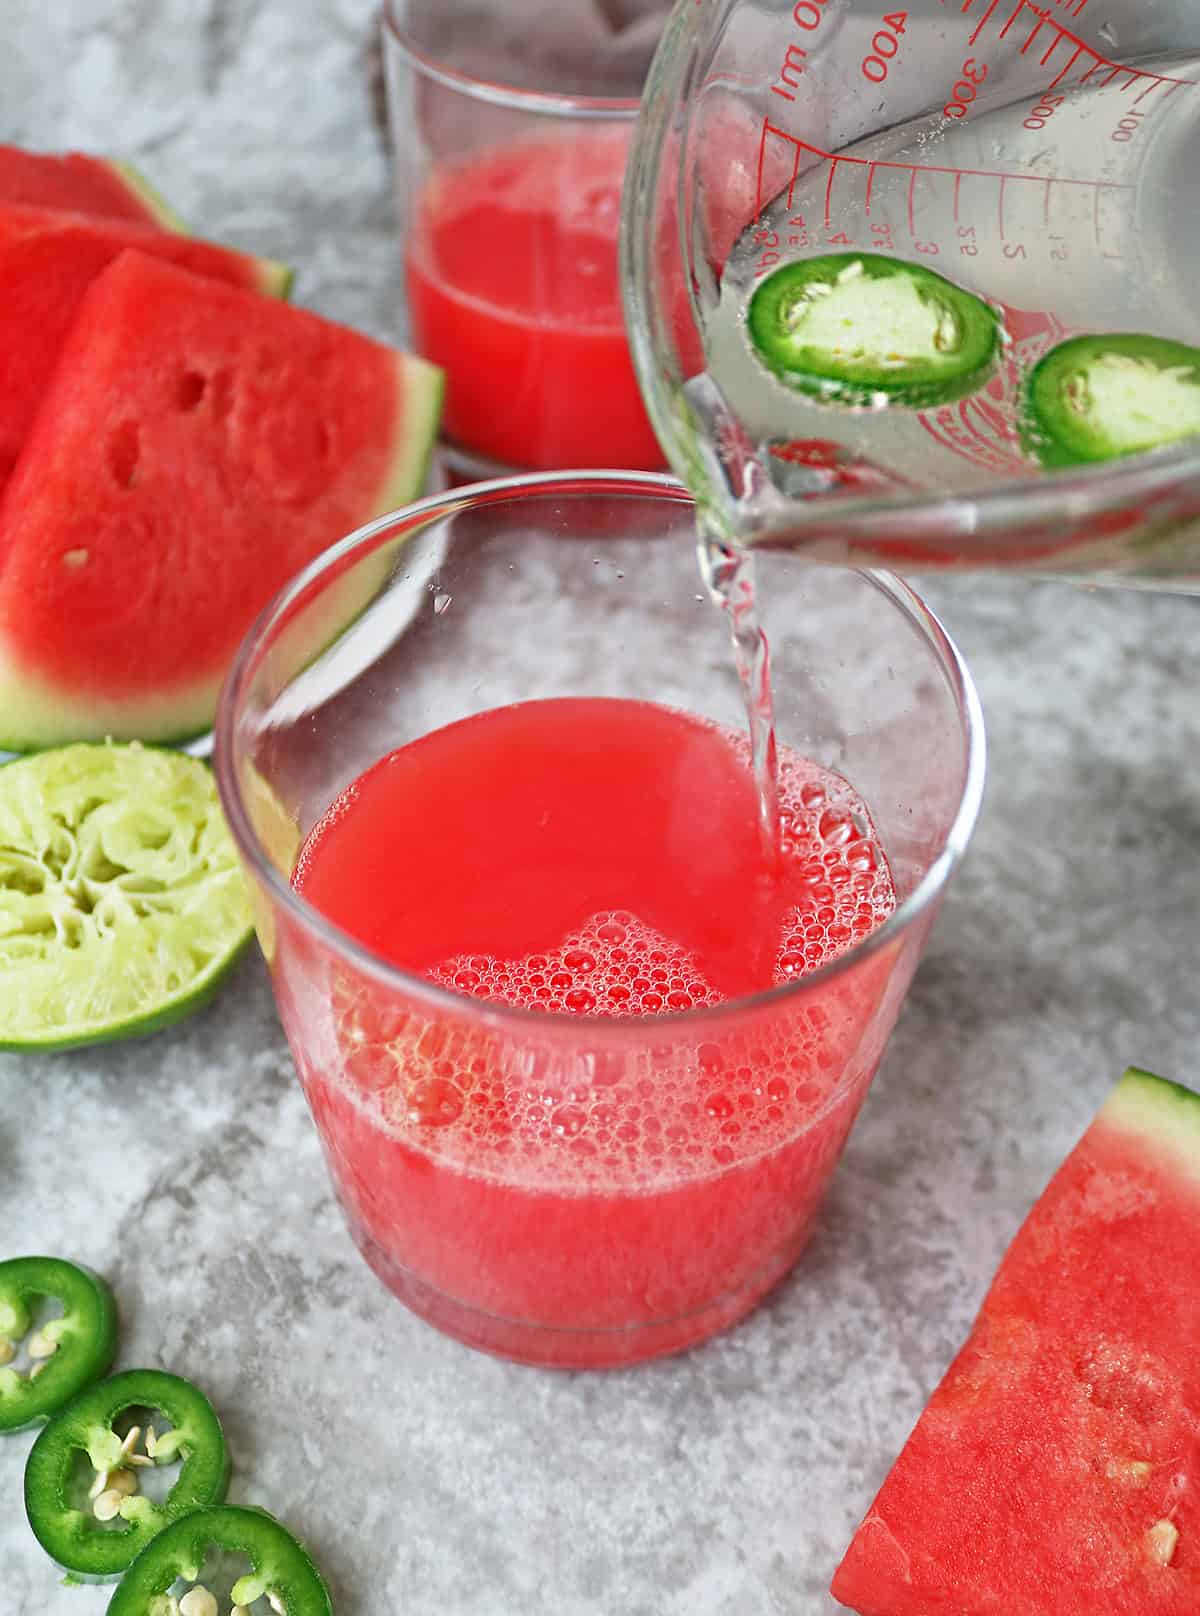 Adding in jalapeno infused sparkling coconut water or lime soda to make watermelon paloma